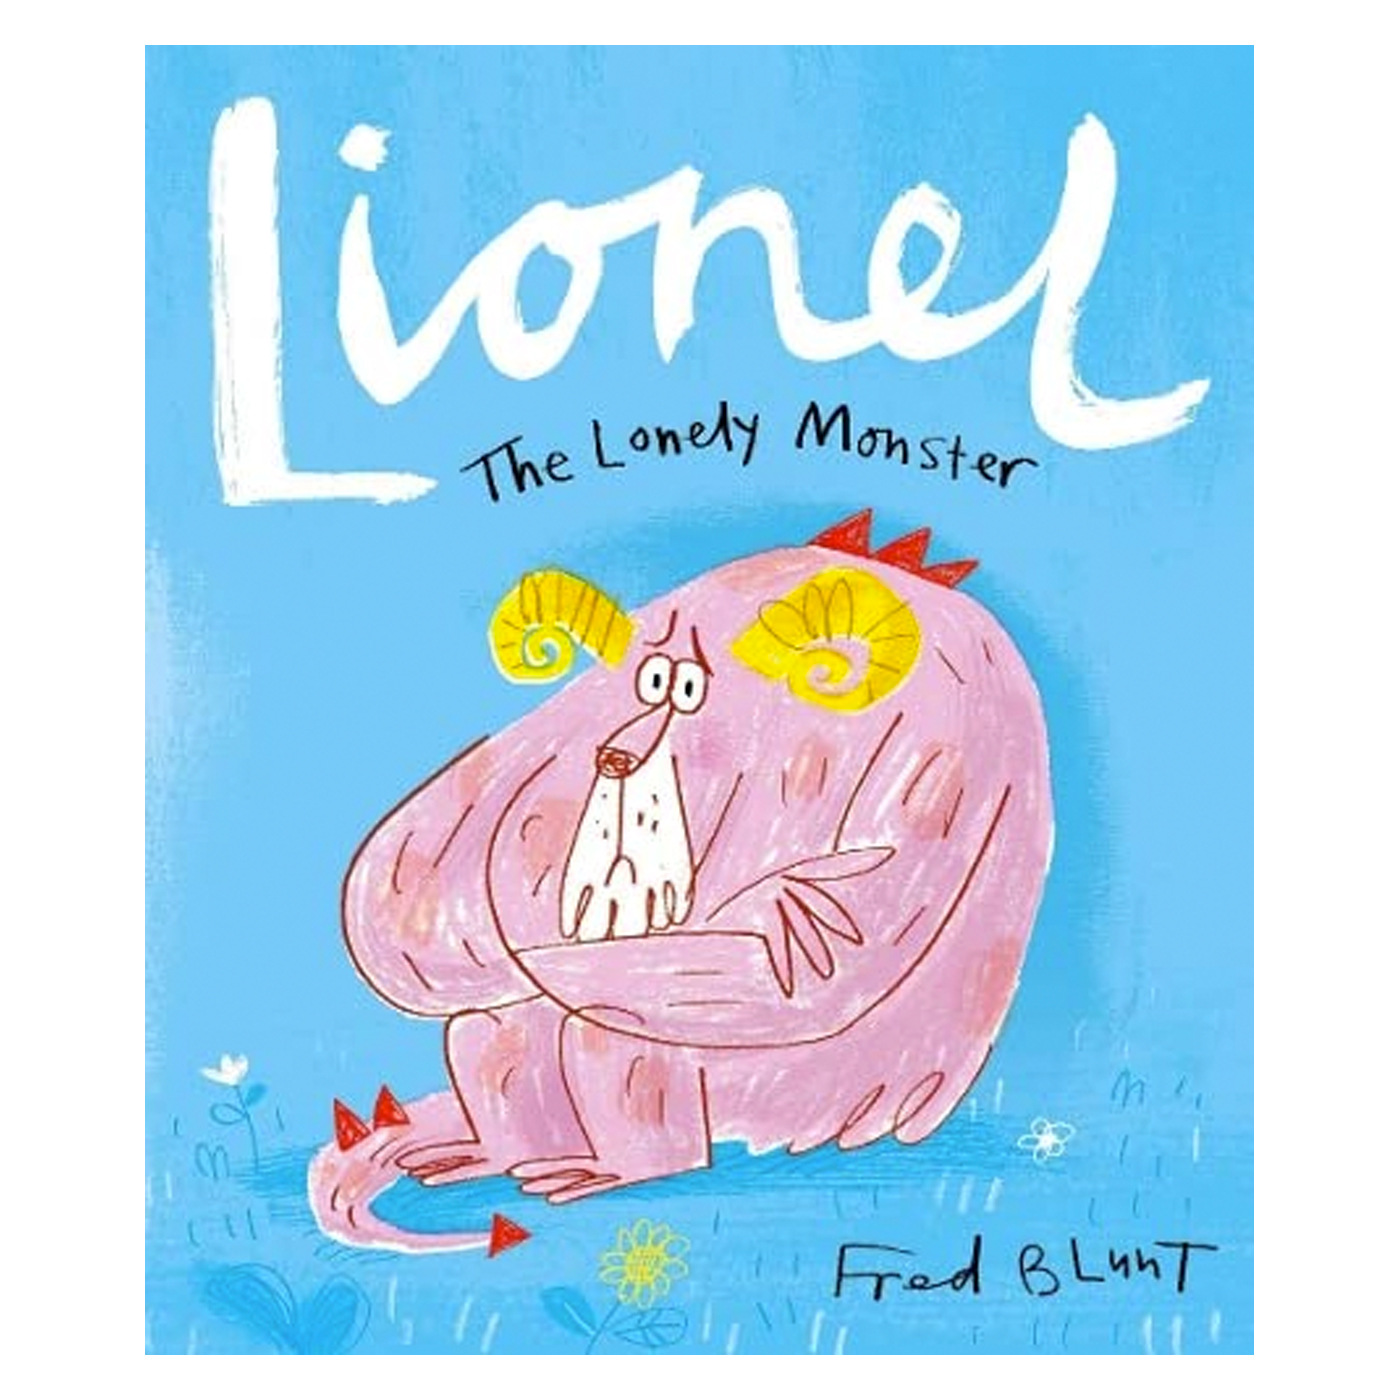 OXFORD CHILDRENS BOOK Lionel The Lonely Monster